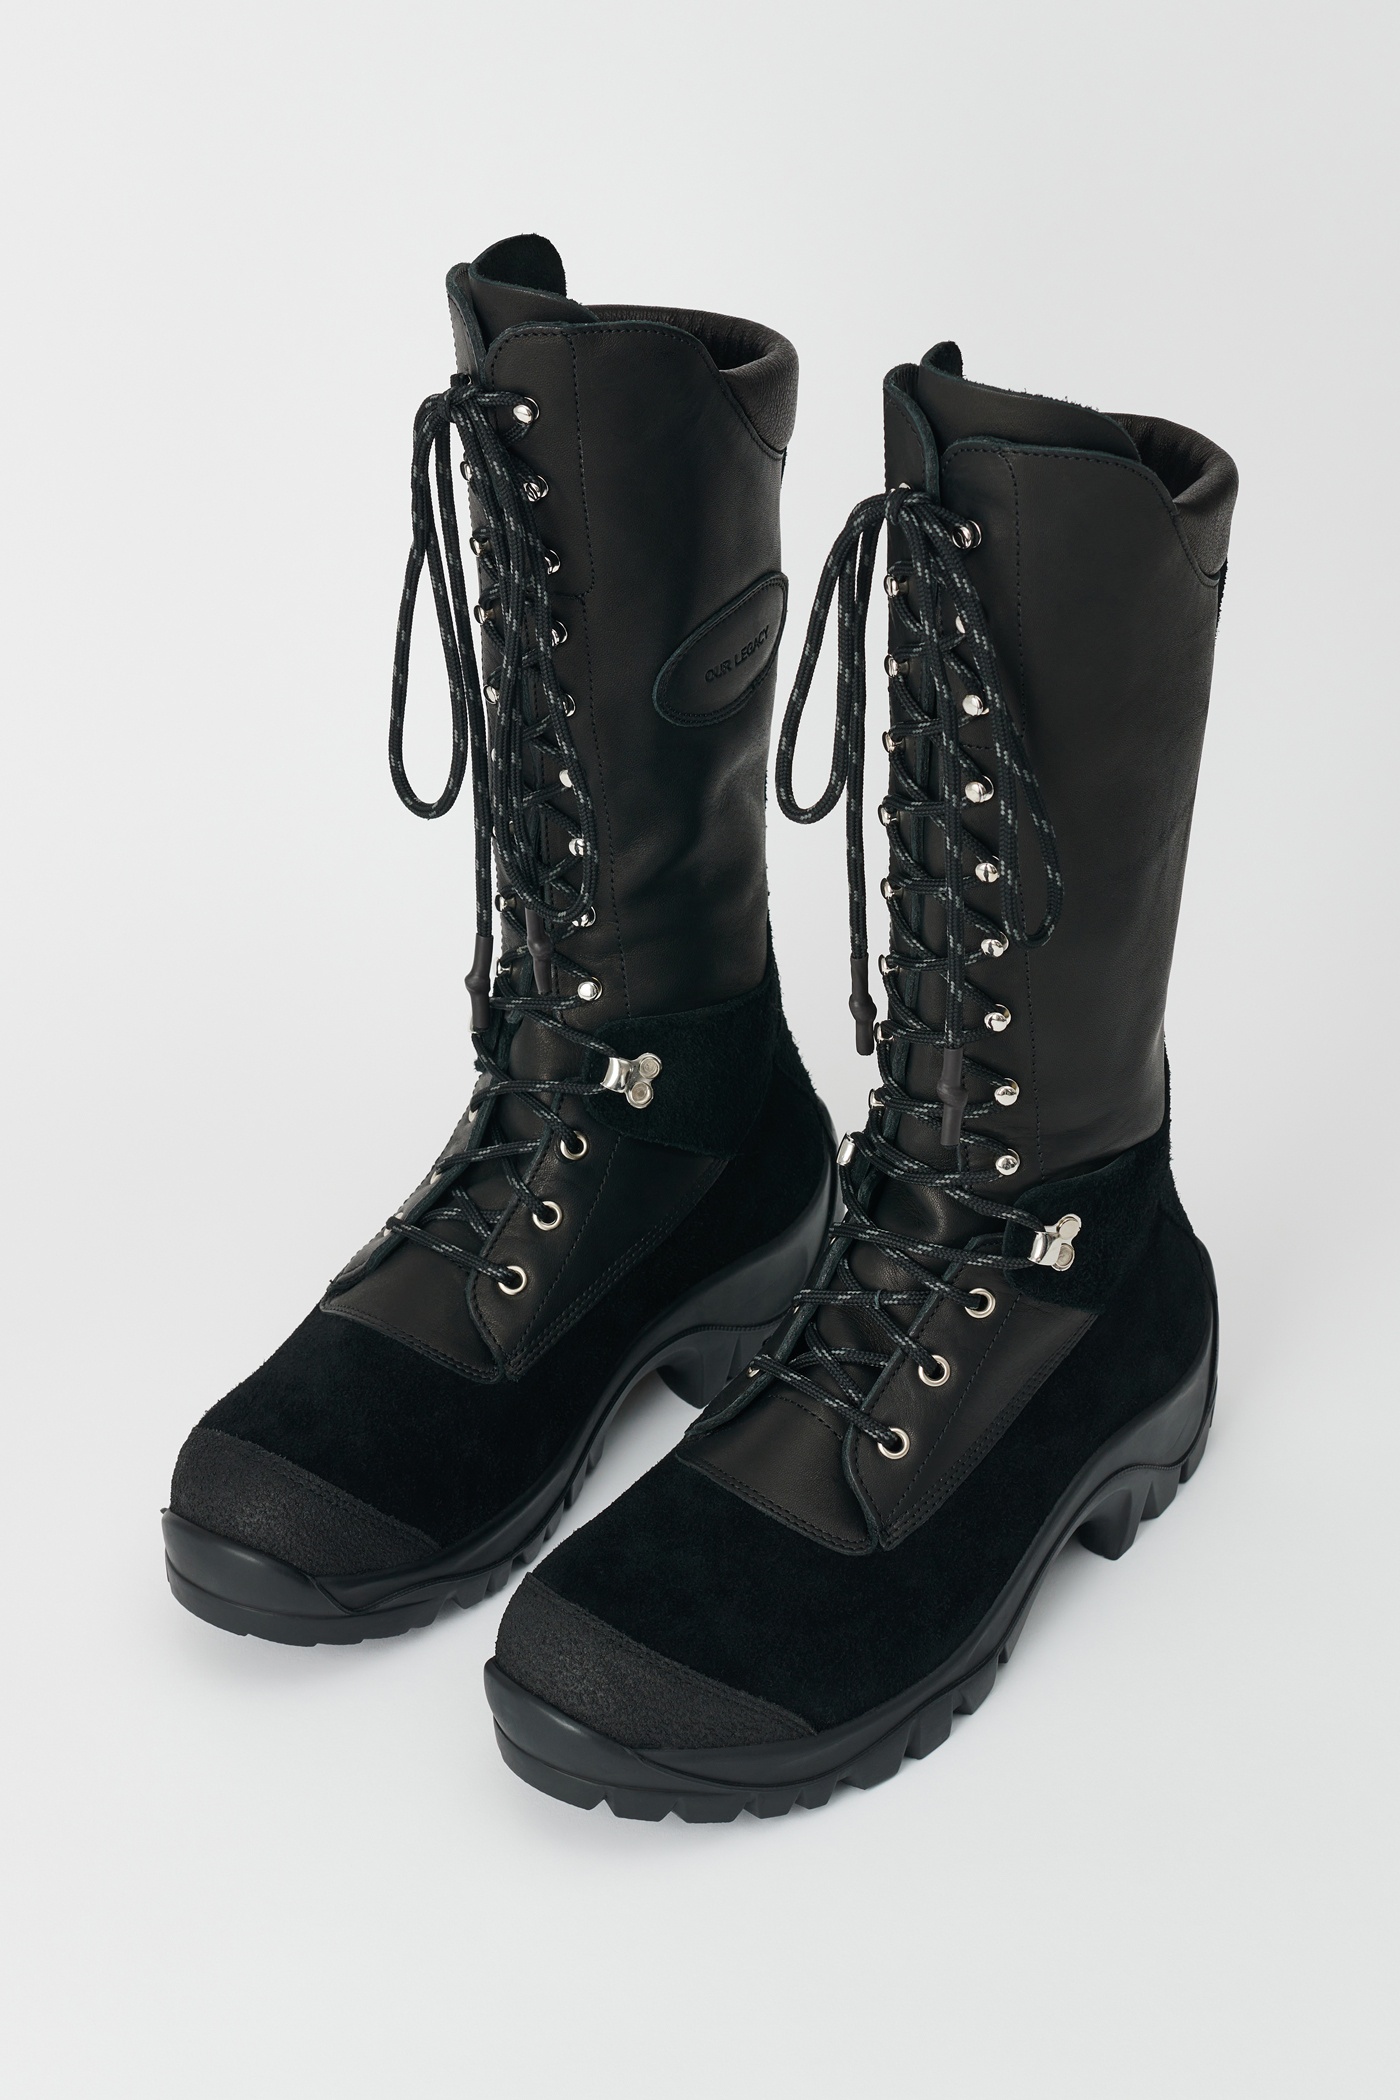 Tower Hiker Boot Black Leather - 9